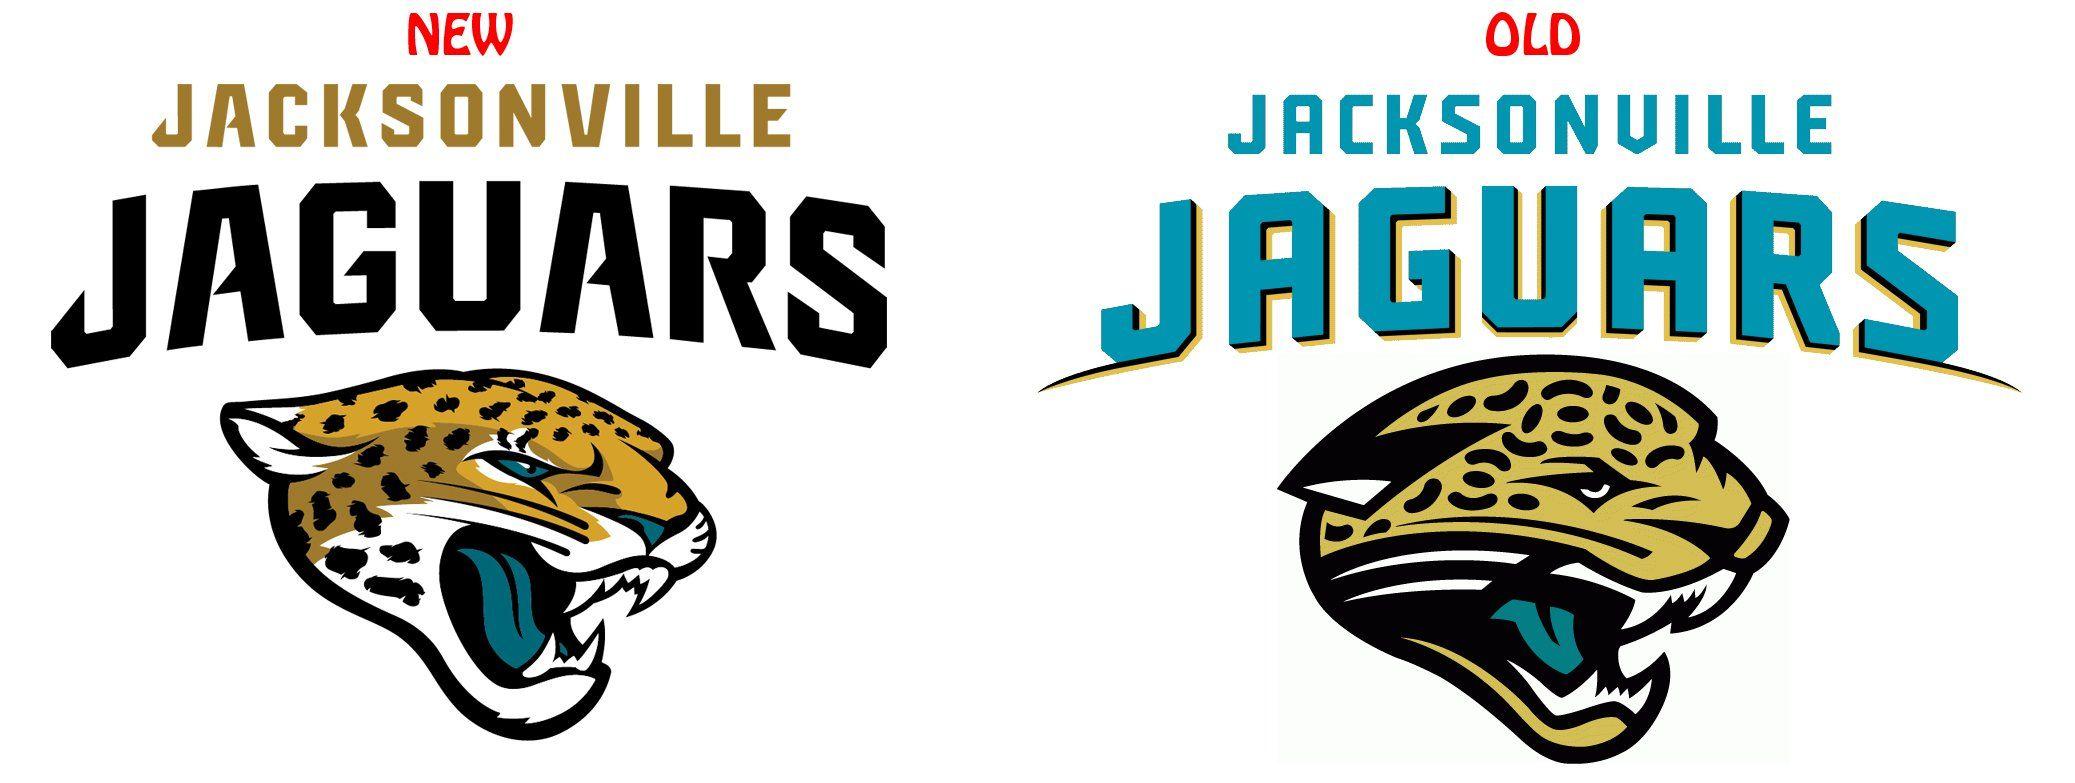 Funny NFL Jaguars Logo - A Funny Thing Happened on the Way to the Jagsâ€™ New Logo: It Didn't ...